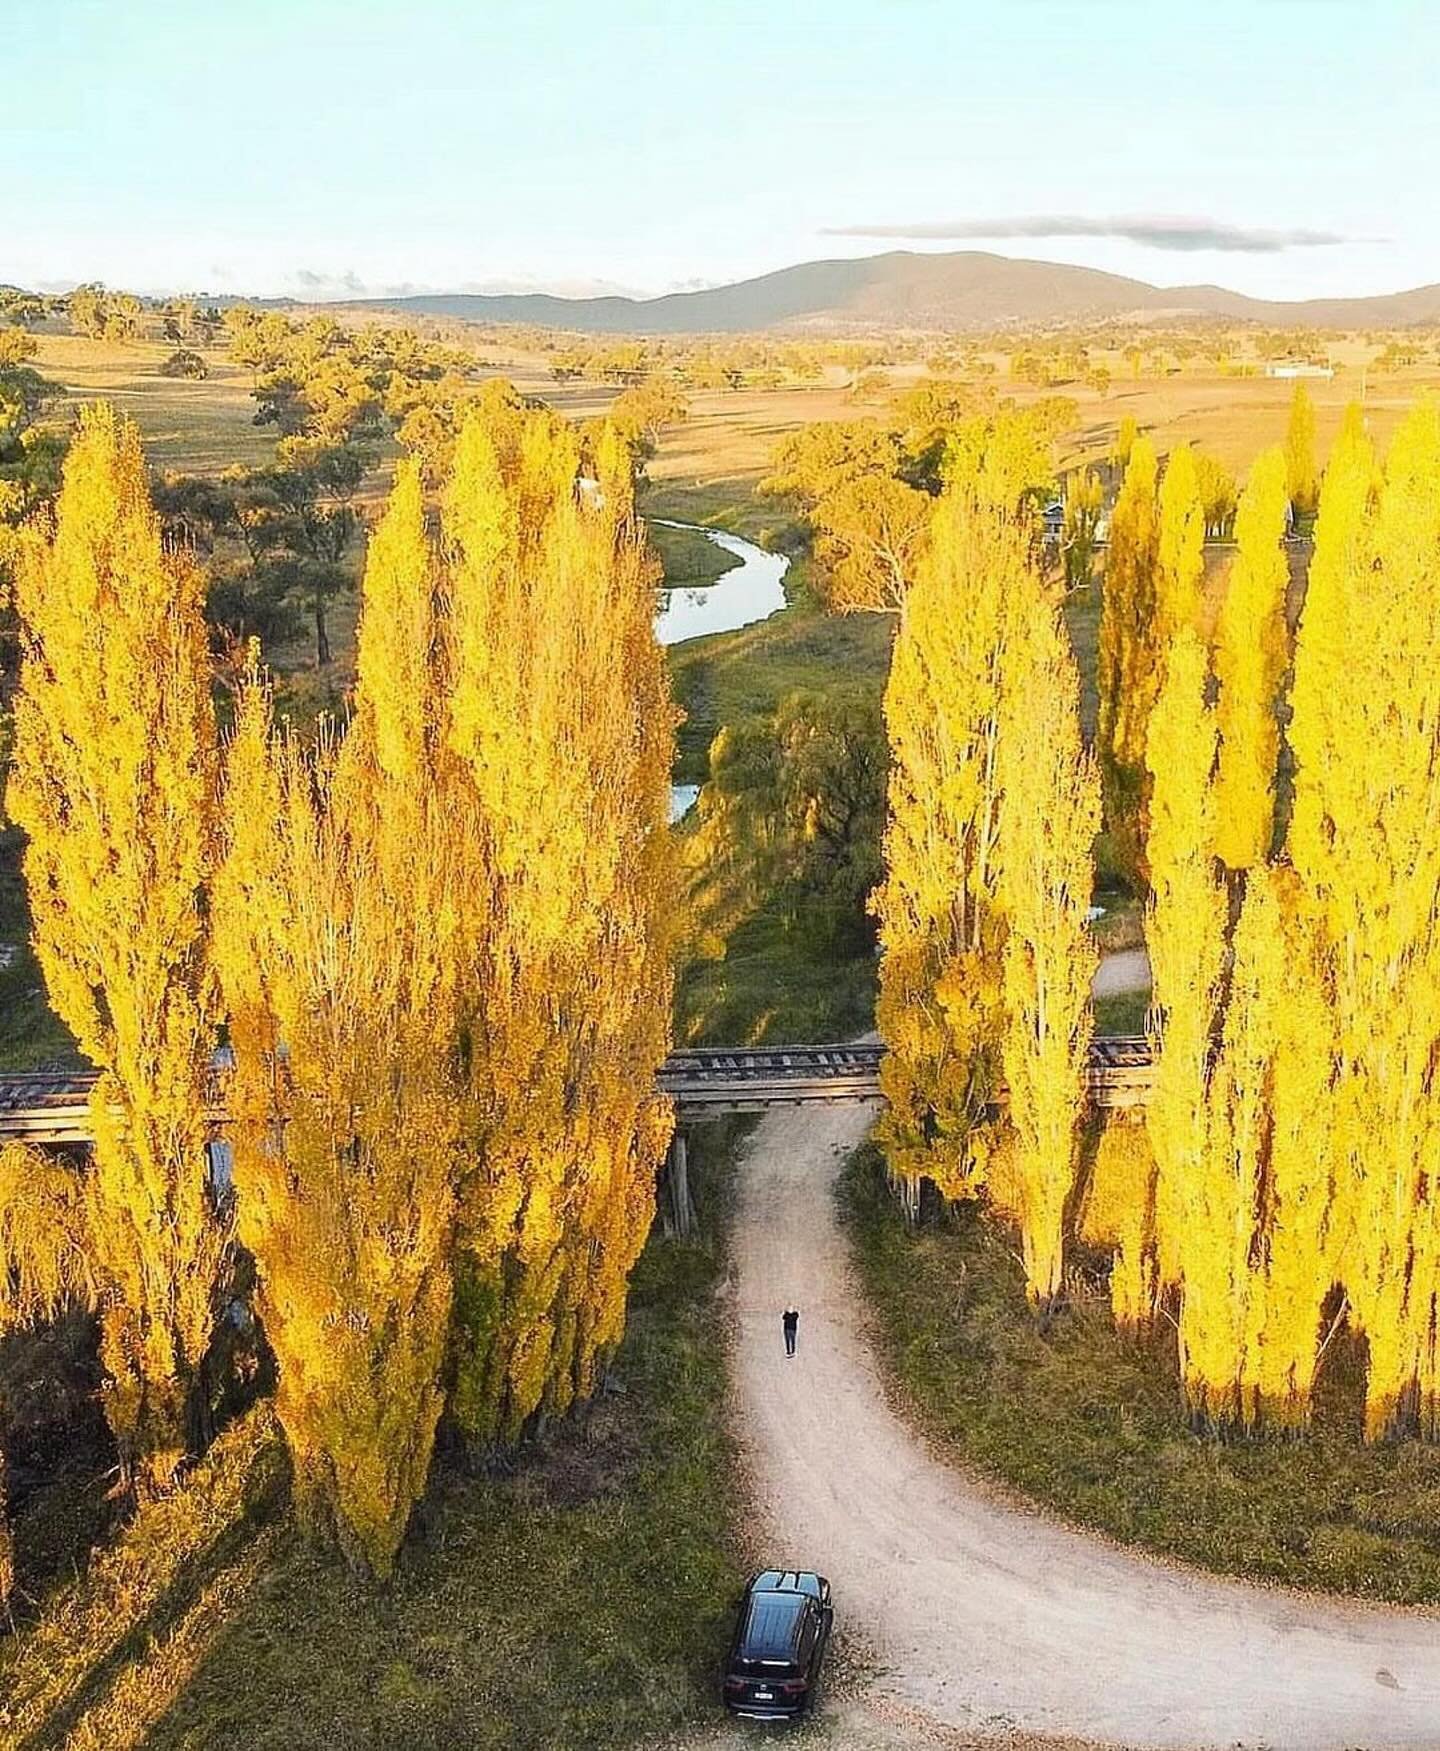 All beautiful Autumn roads lead to Tenterfield 🍁🍂

Whether you are driving to Tenterfield from the North, South, East or West you will find pockets of beautiful Autumn trees along the country roads in all the golden hues of yellow, reds, oranges an